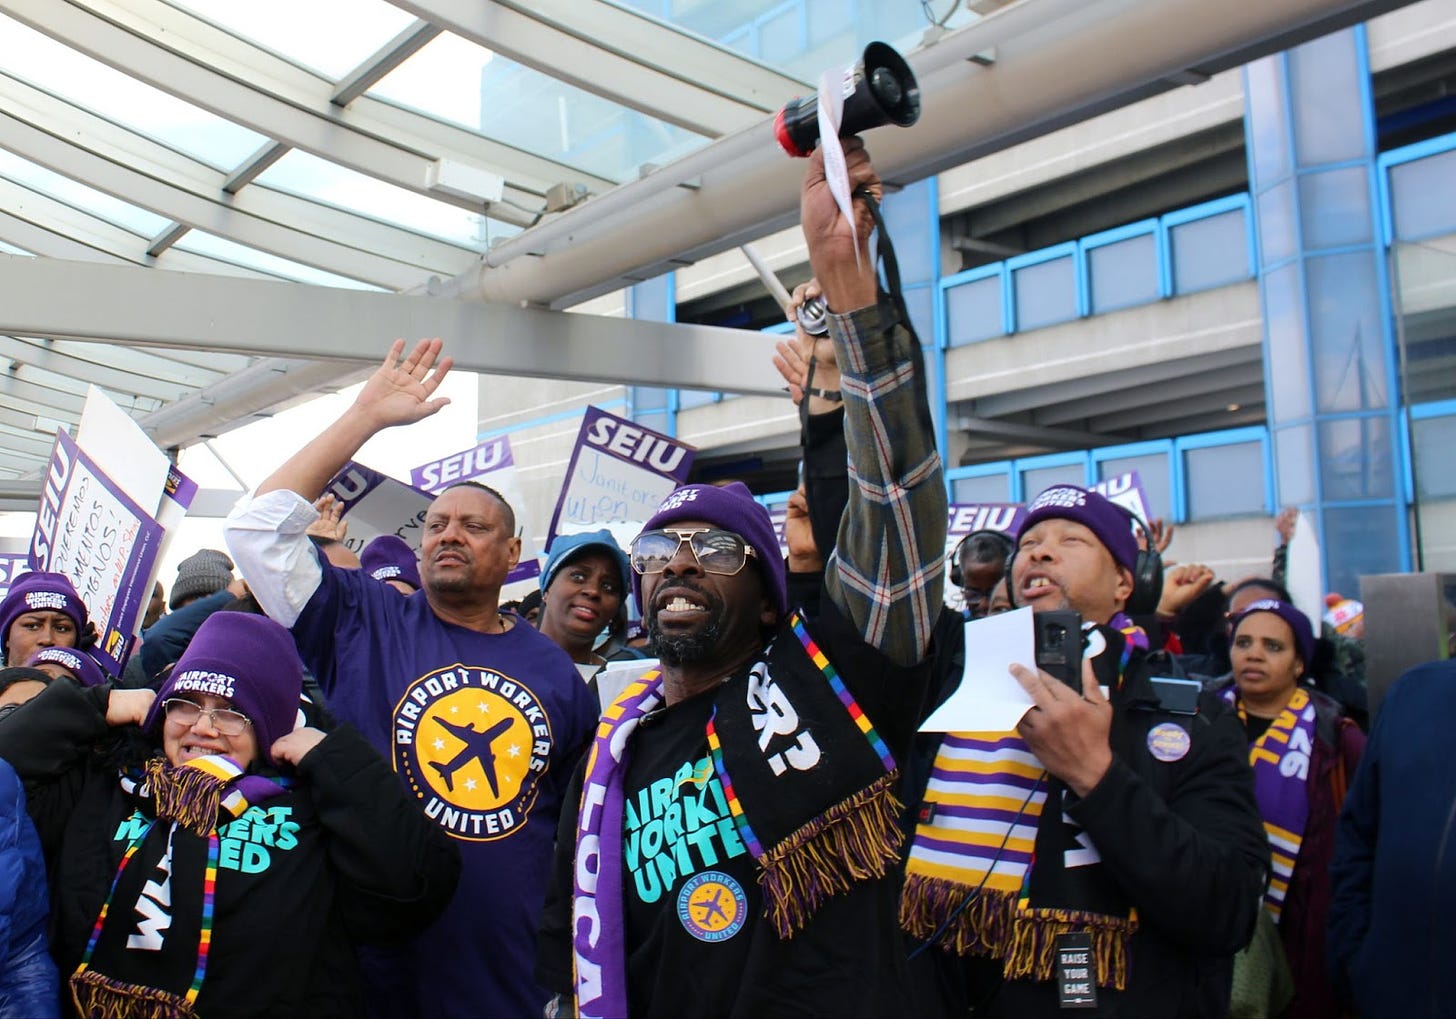 a crowd of people of color wearing purple hats and holding up purple SEIU picket signs, one black man in the center wearing sunglasses holds up a small black megaphone